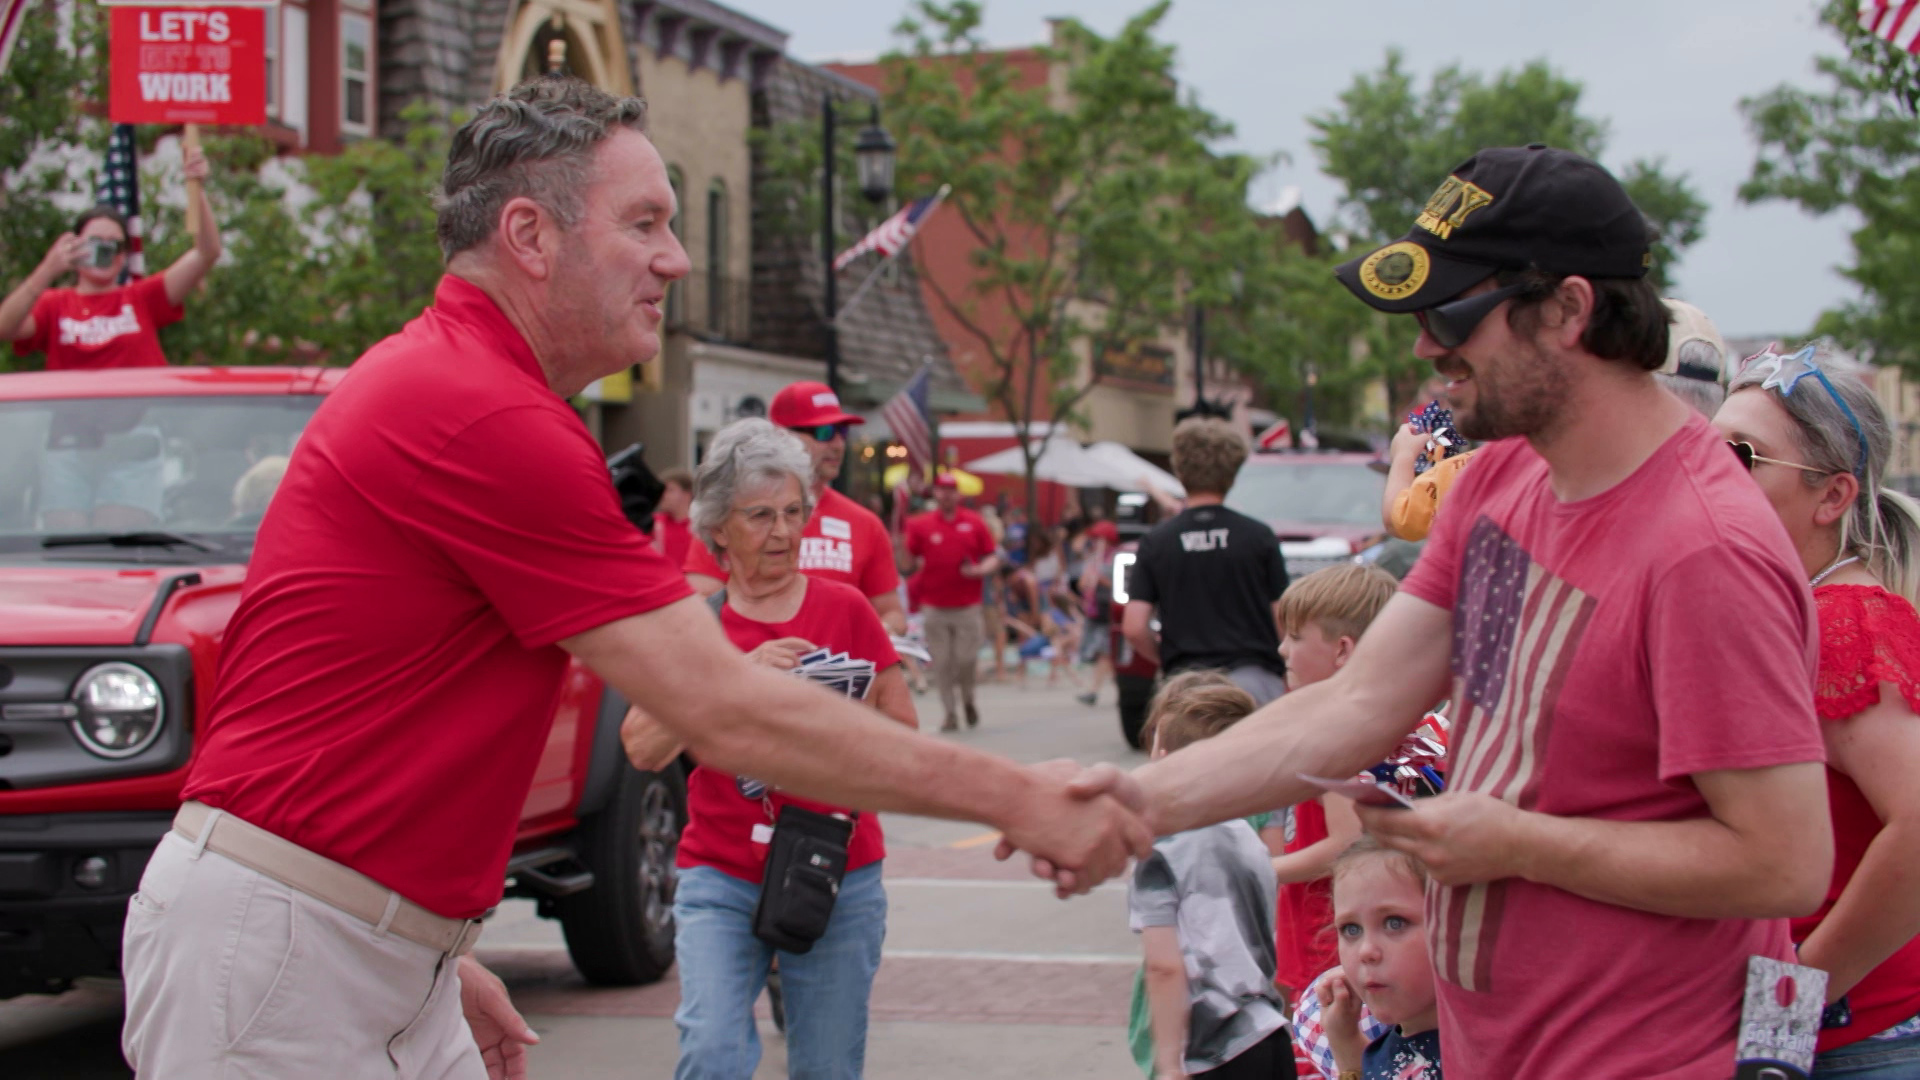 Tim Michels shakes the hand of another person while walking down a street as part of a parade.